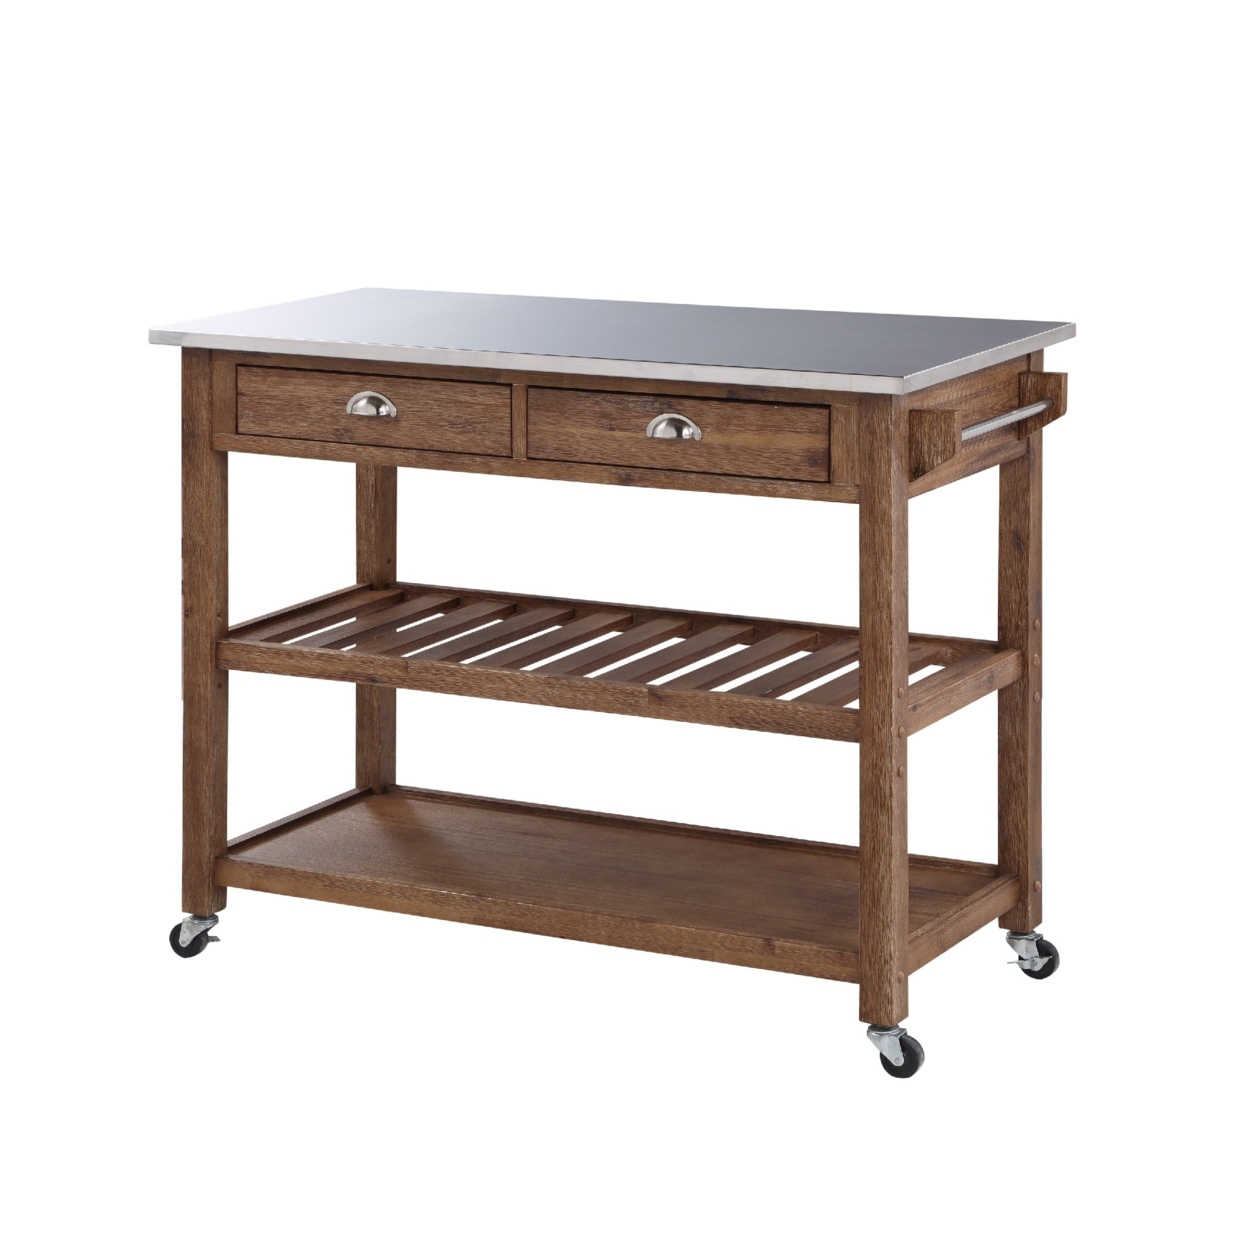 Amber 45 Inch Kitchen Cart Island, Stainless Steel Top, 2 Drawers And 2 Shelves, Brown- Saltoro Sherpi